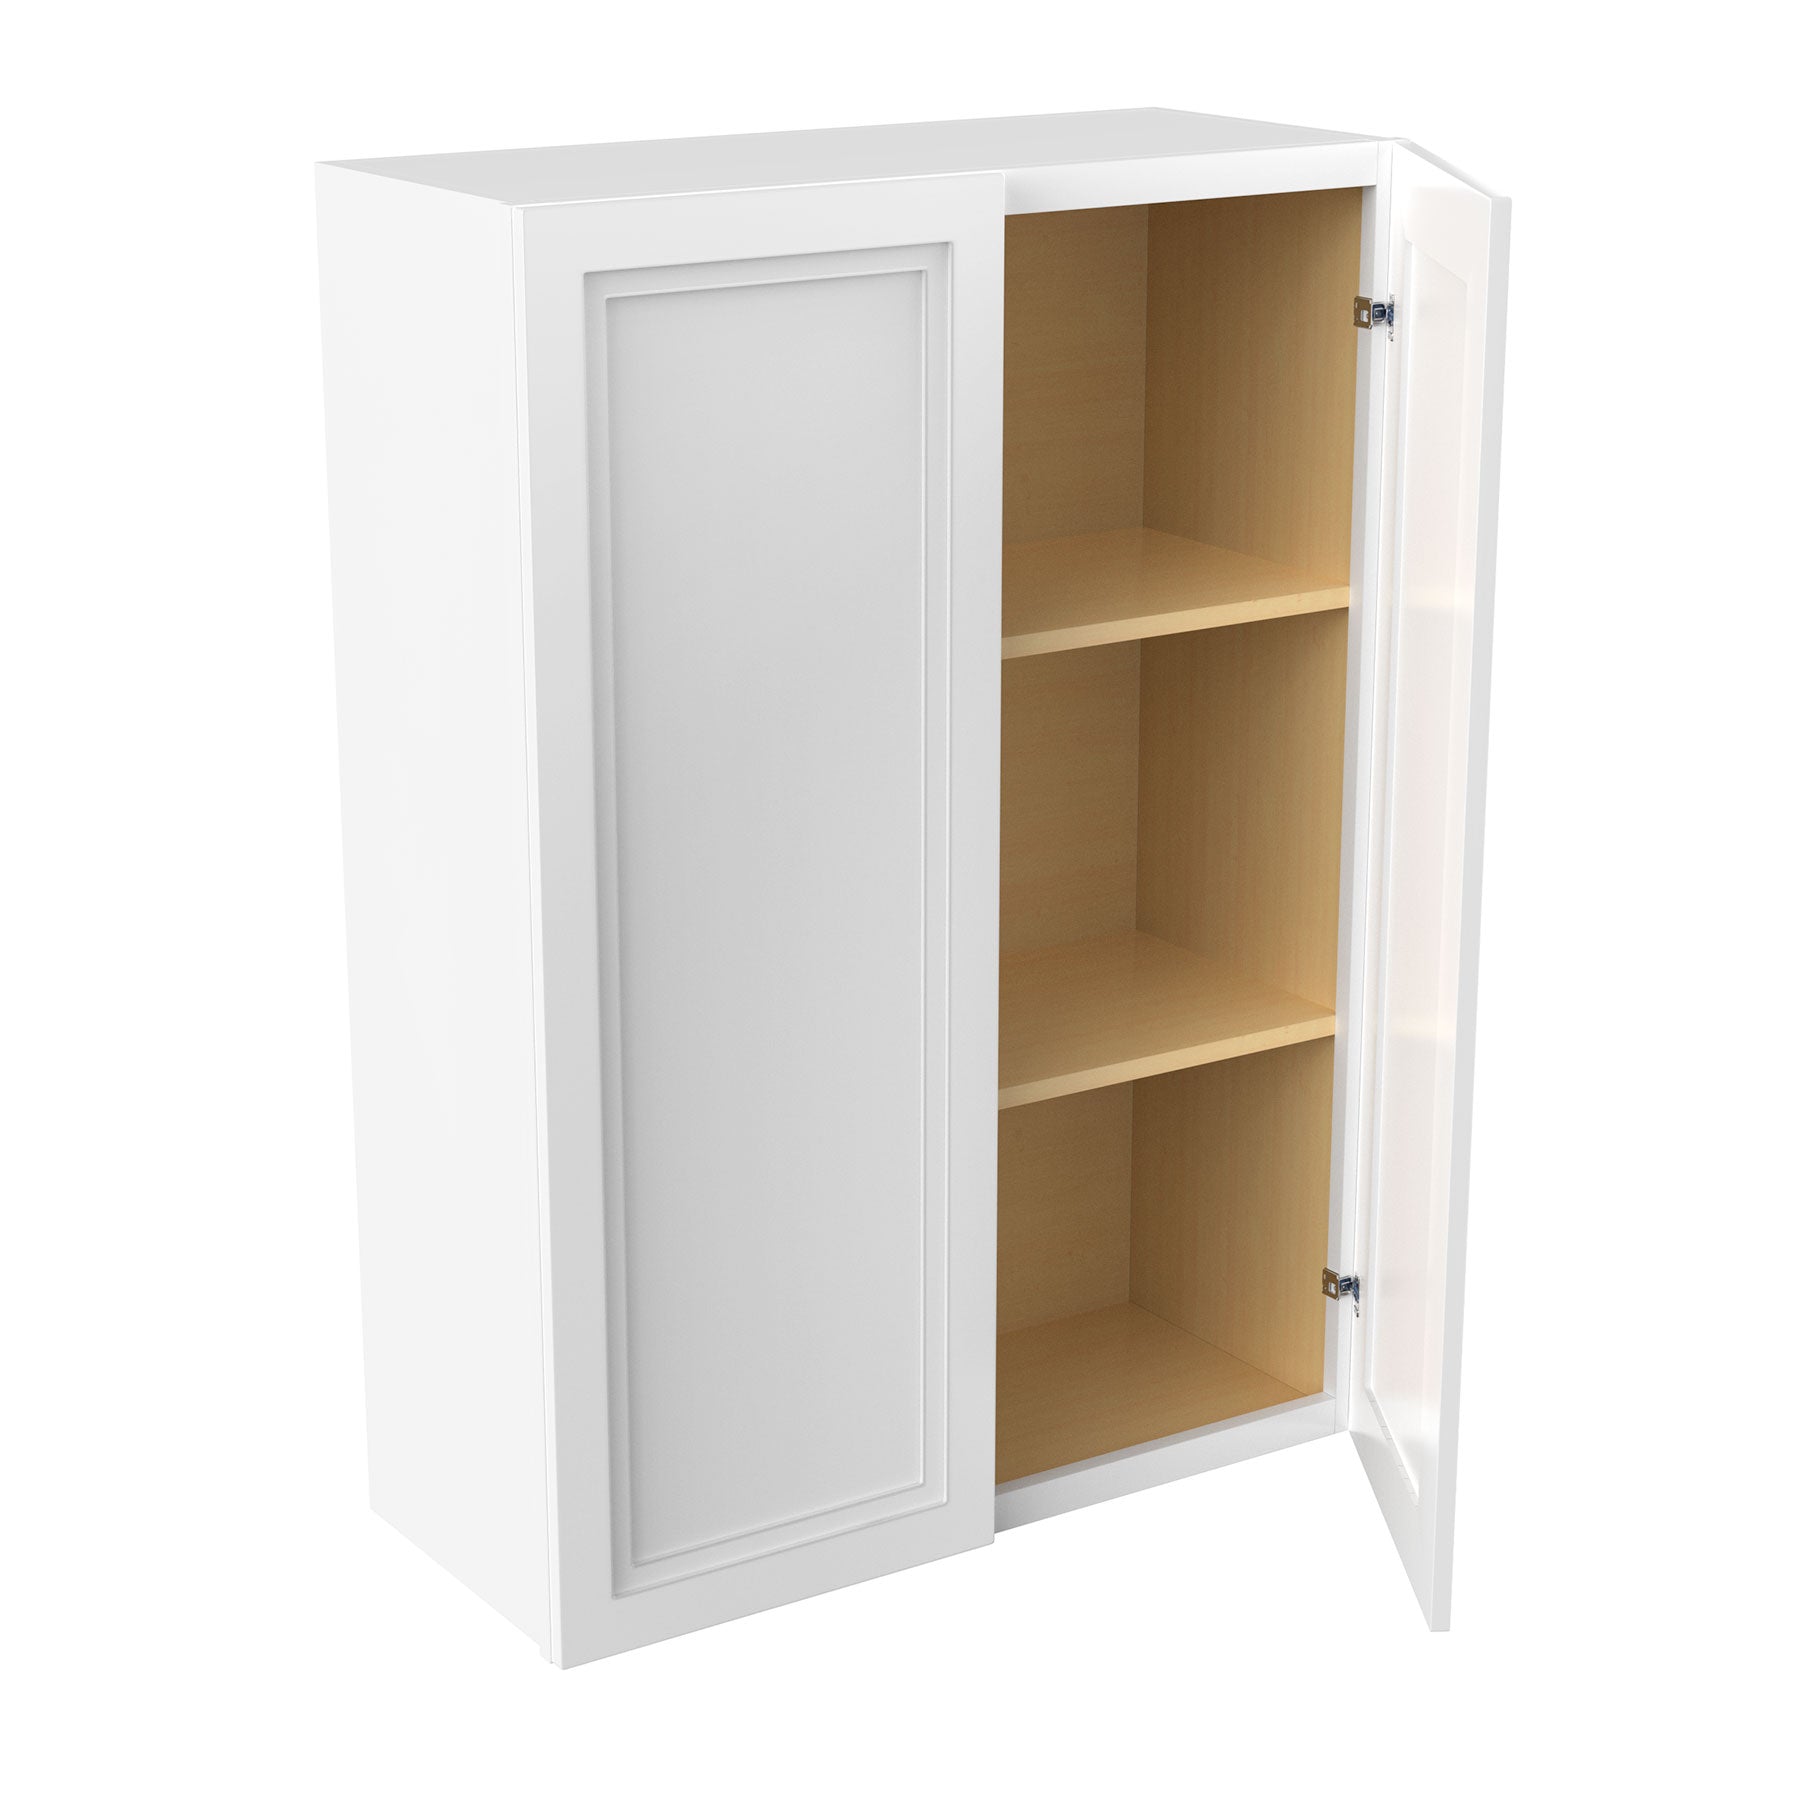 RTA - Fashion White - 42" High Double Door Wall Cabinet | 30"W x 42"H x 12"D